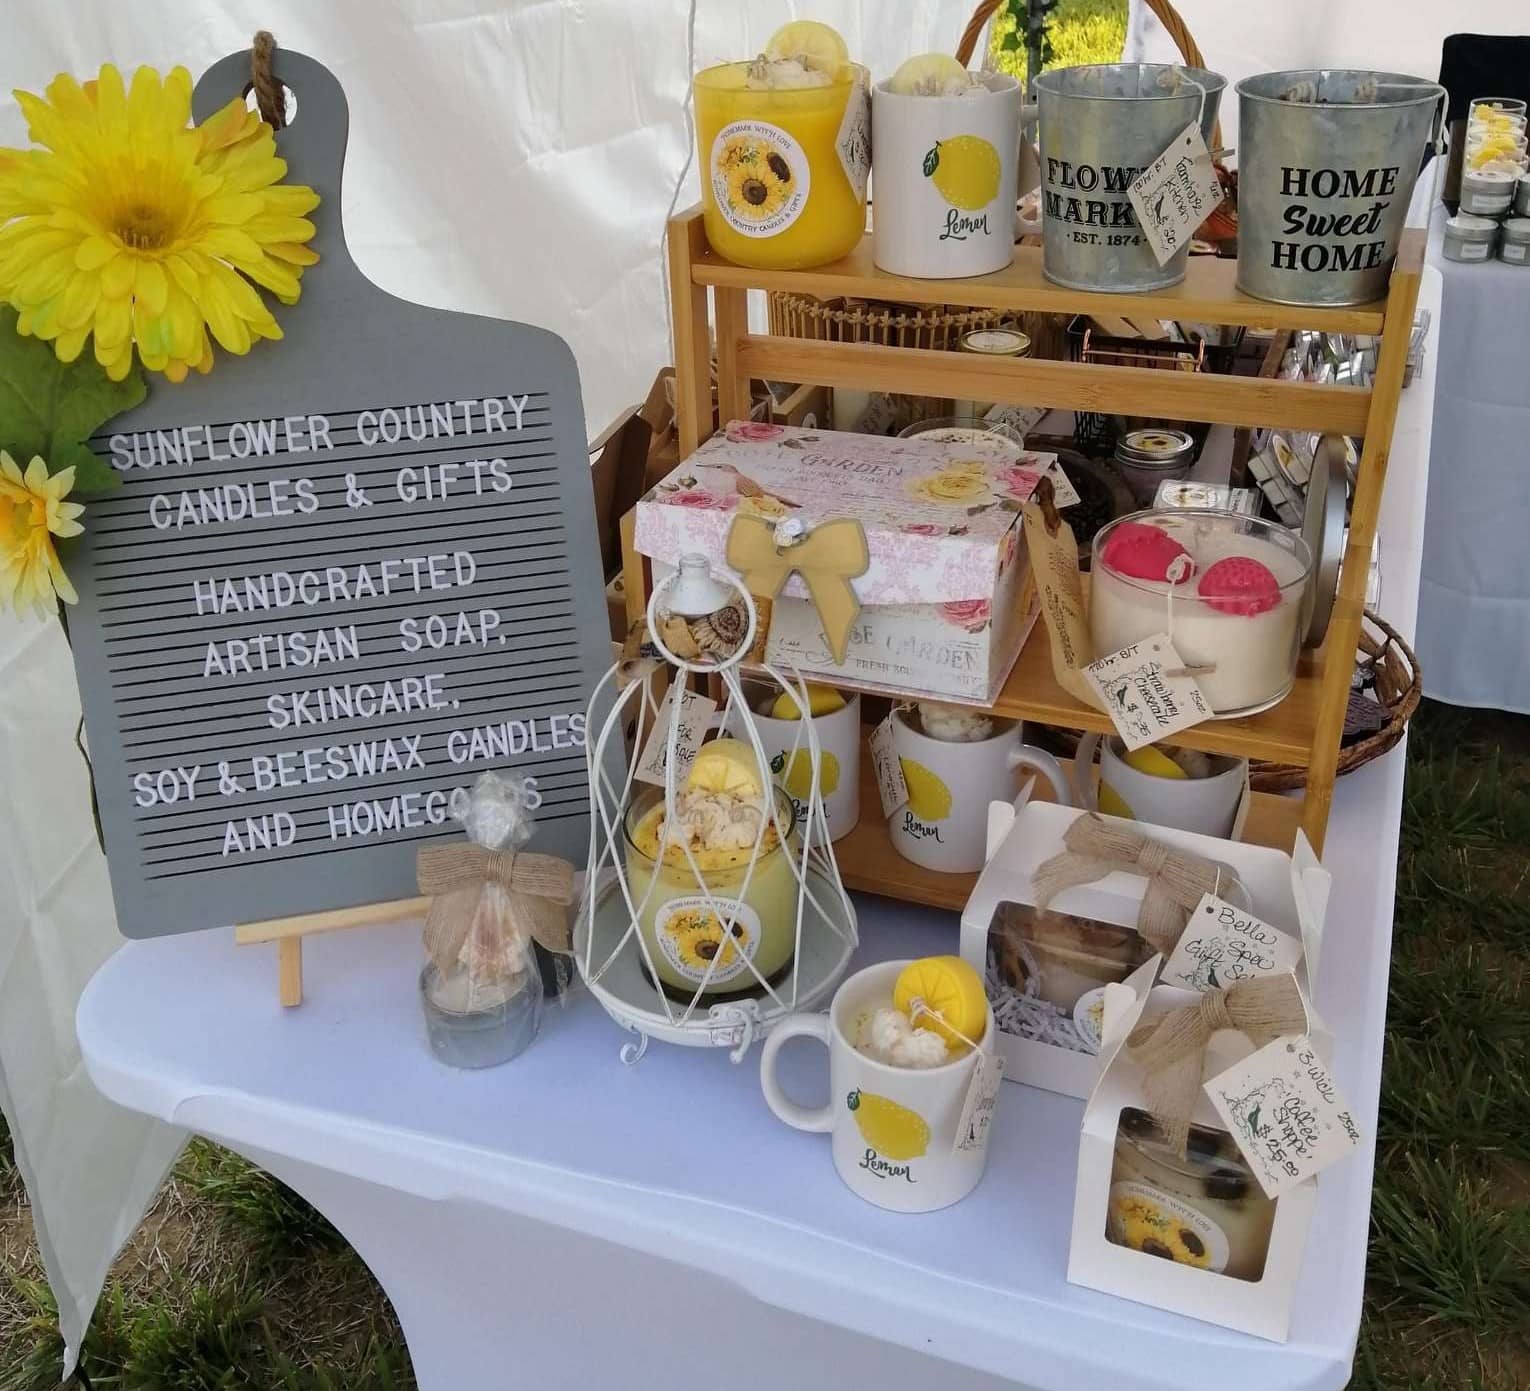 Sunflower Country Candles Events